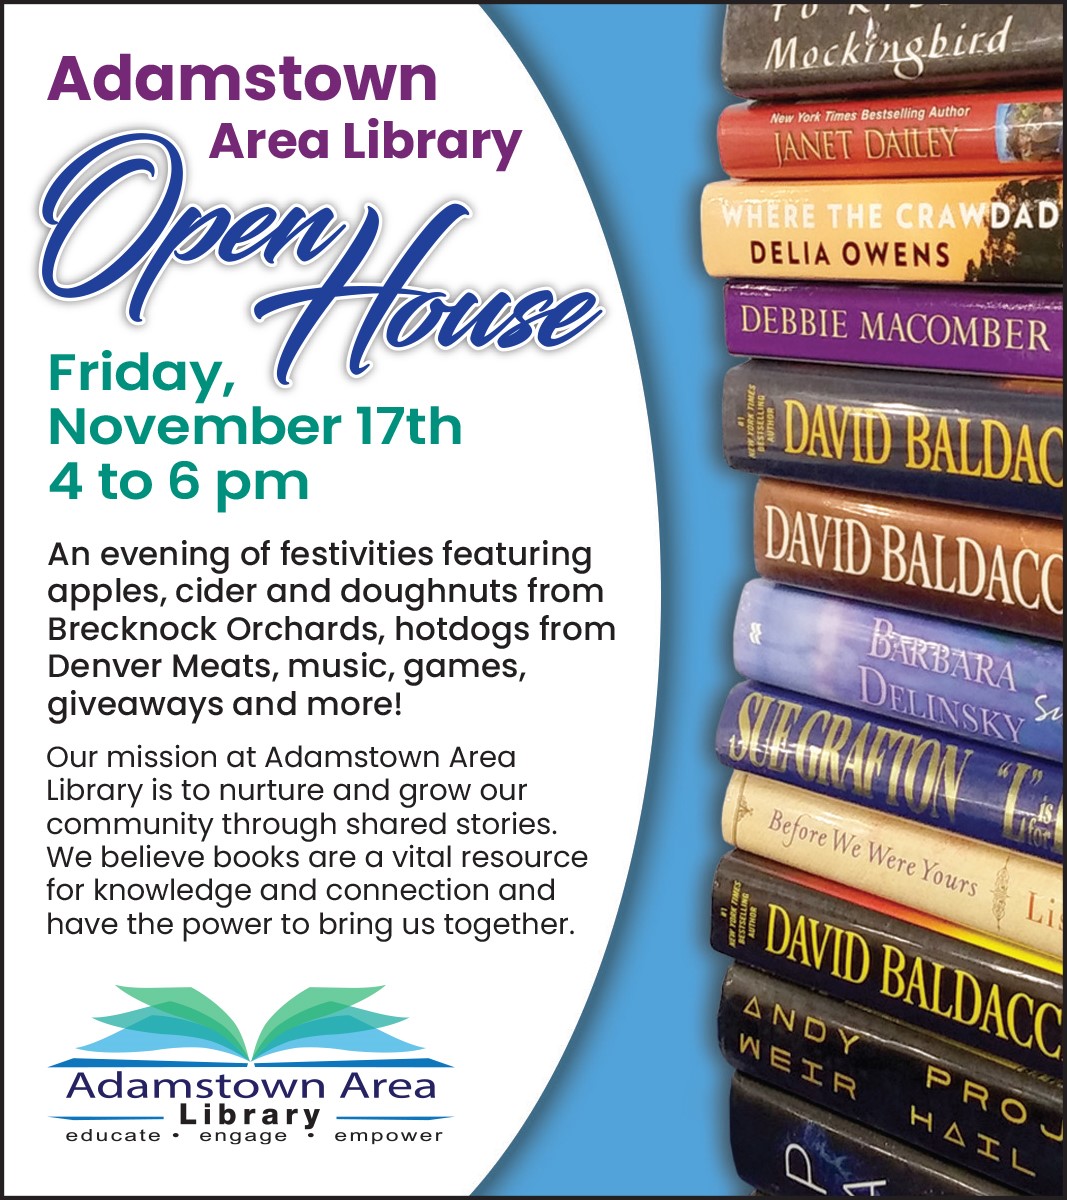 Adamstown Area Library Open House advertisement with event description, logo, and stack of books